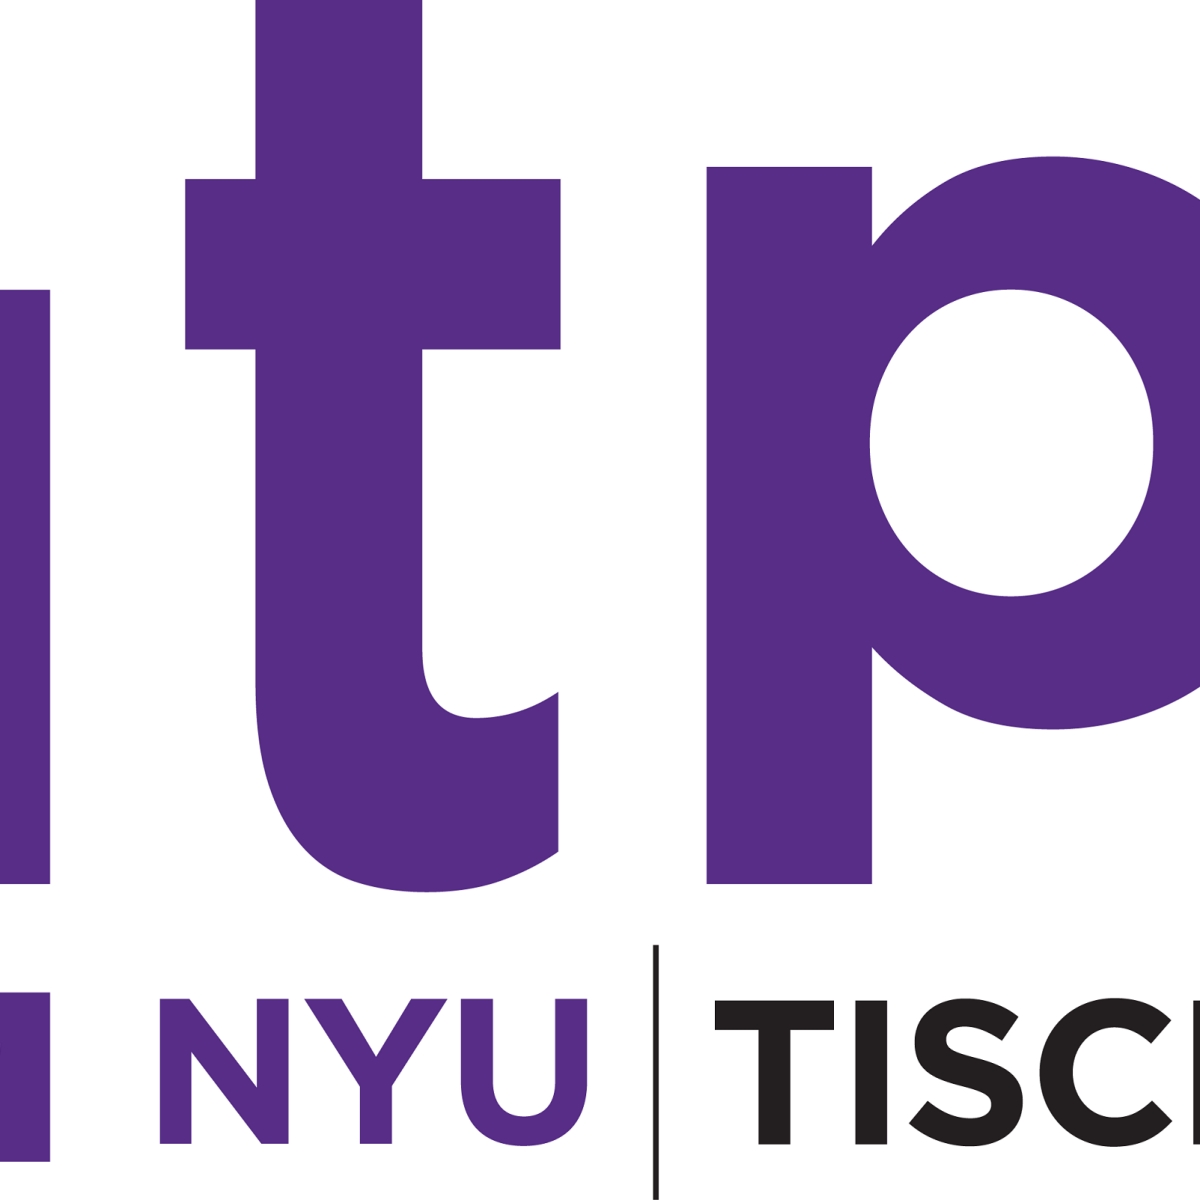 Image of purple ITP logo against a white background.